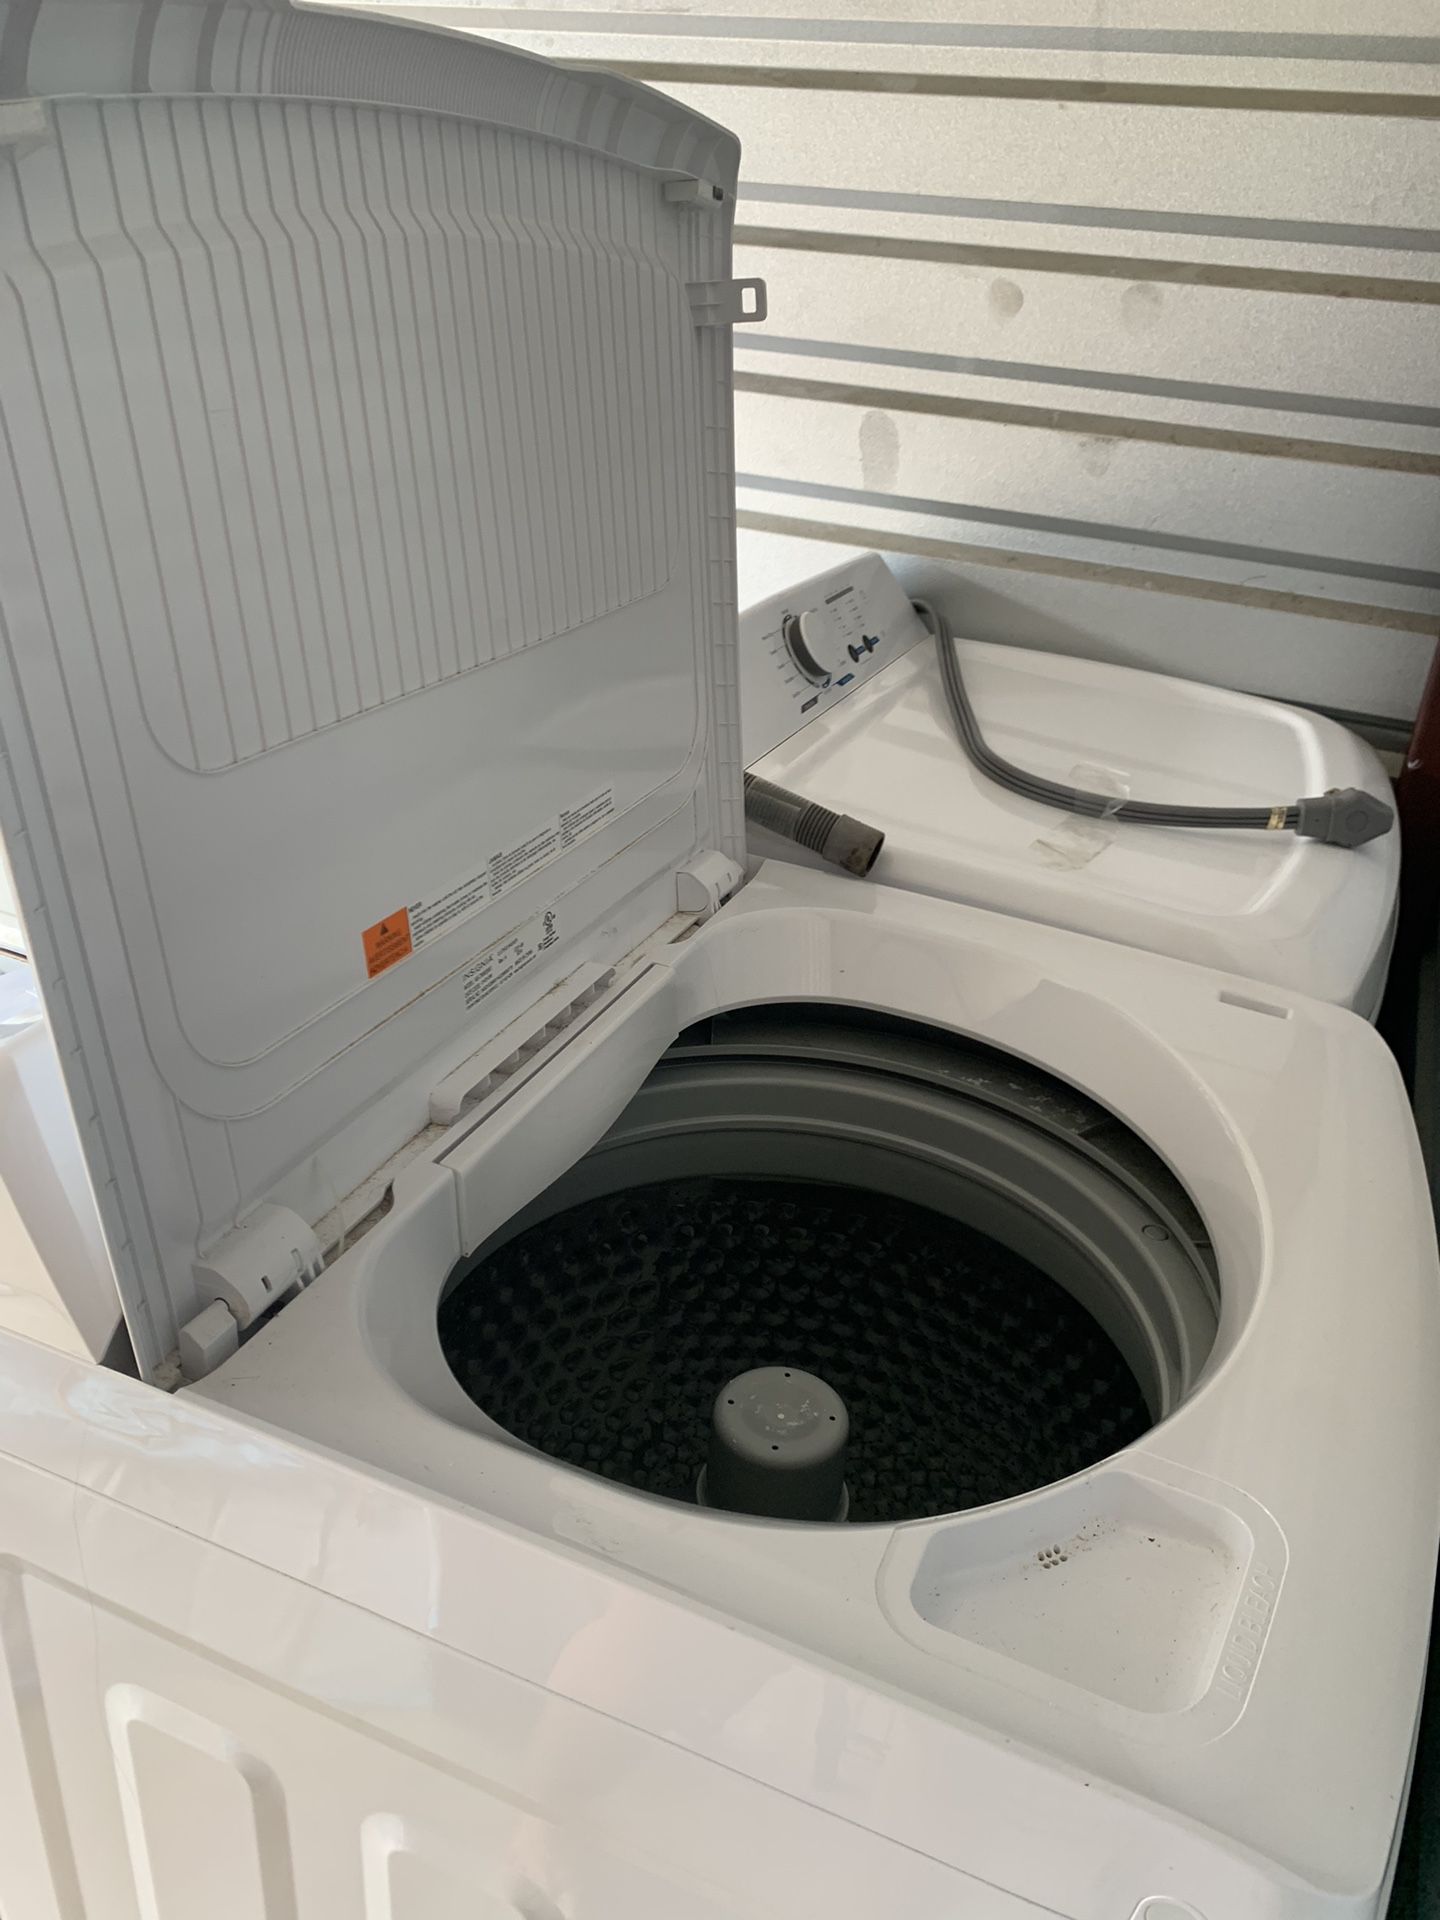 Insignia washer & Dryer Combo